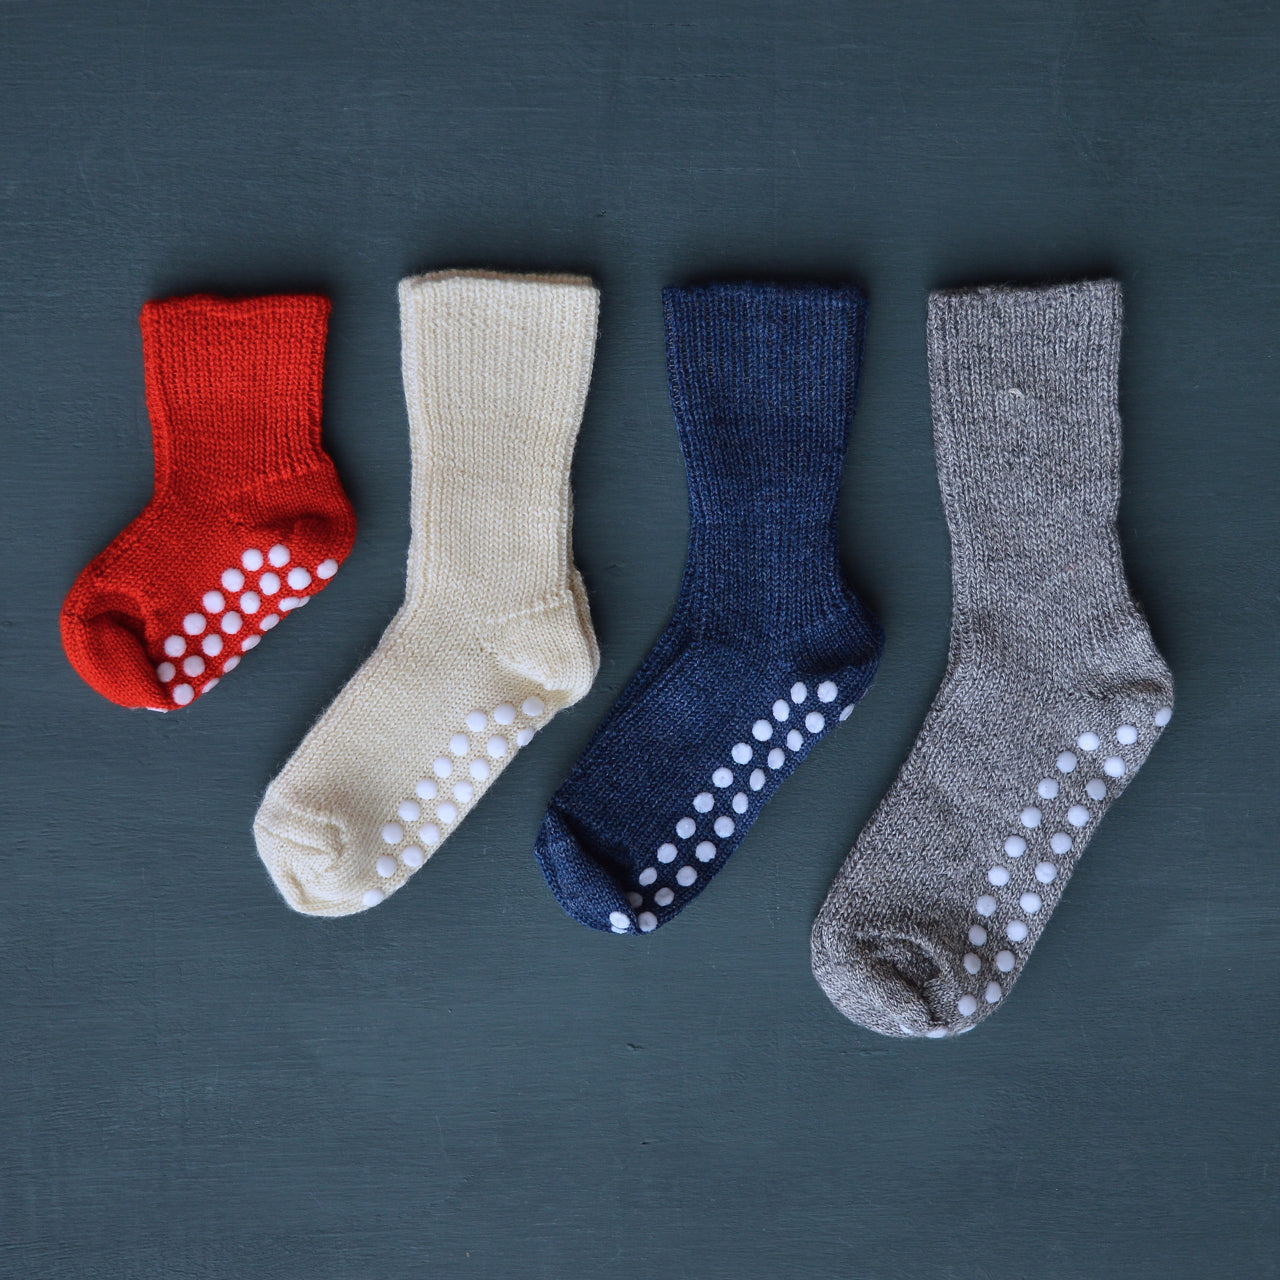 Introducing 100% Organic Wool Socks and Tights by Hirsch Natur